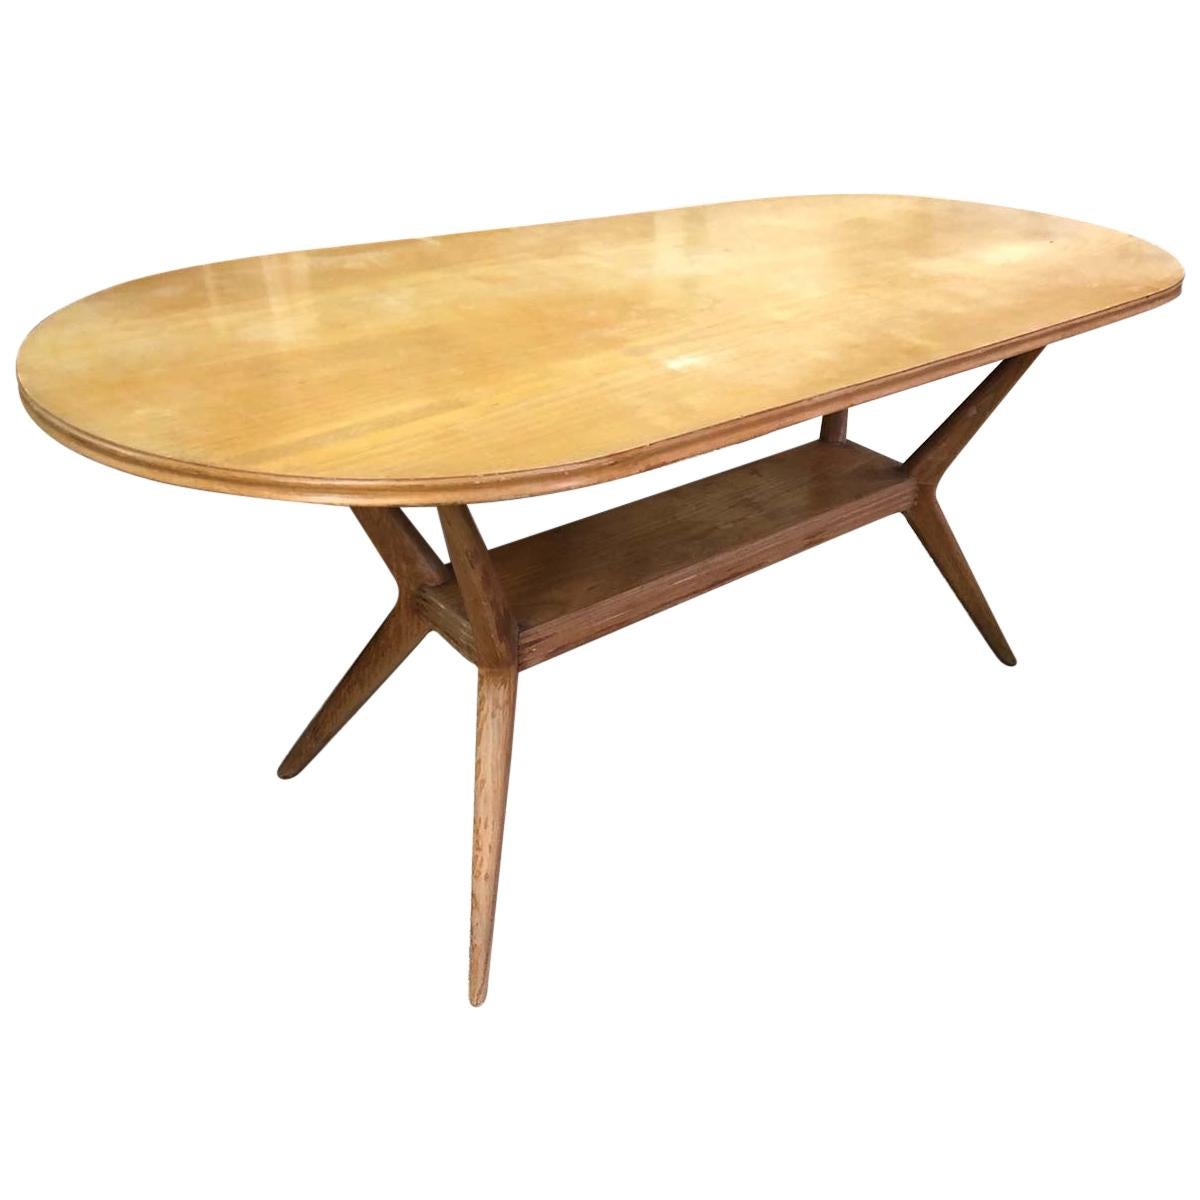 Italian Design Table Chestnut from the 1960s Restored Wax Polished from Tuscany For Sale